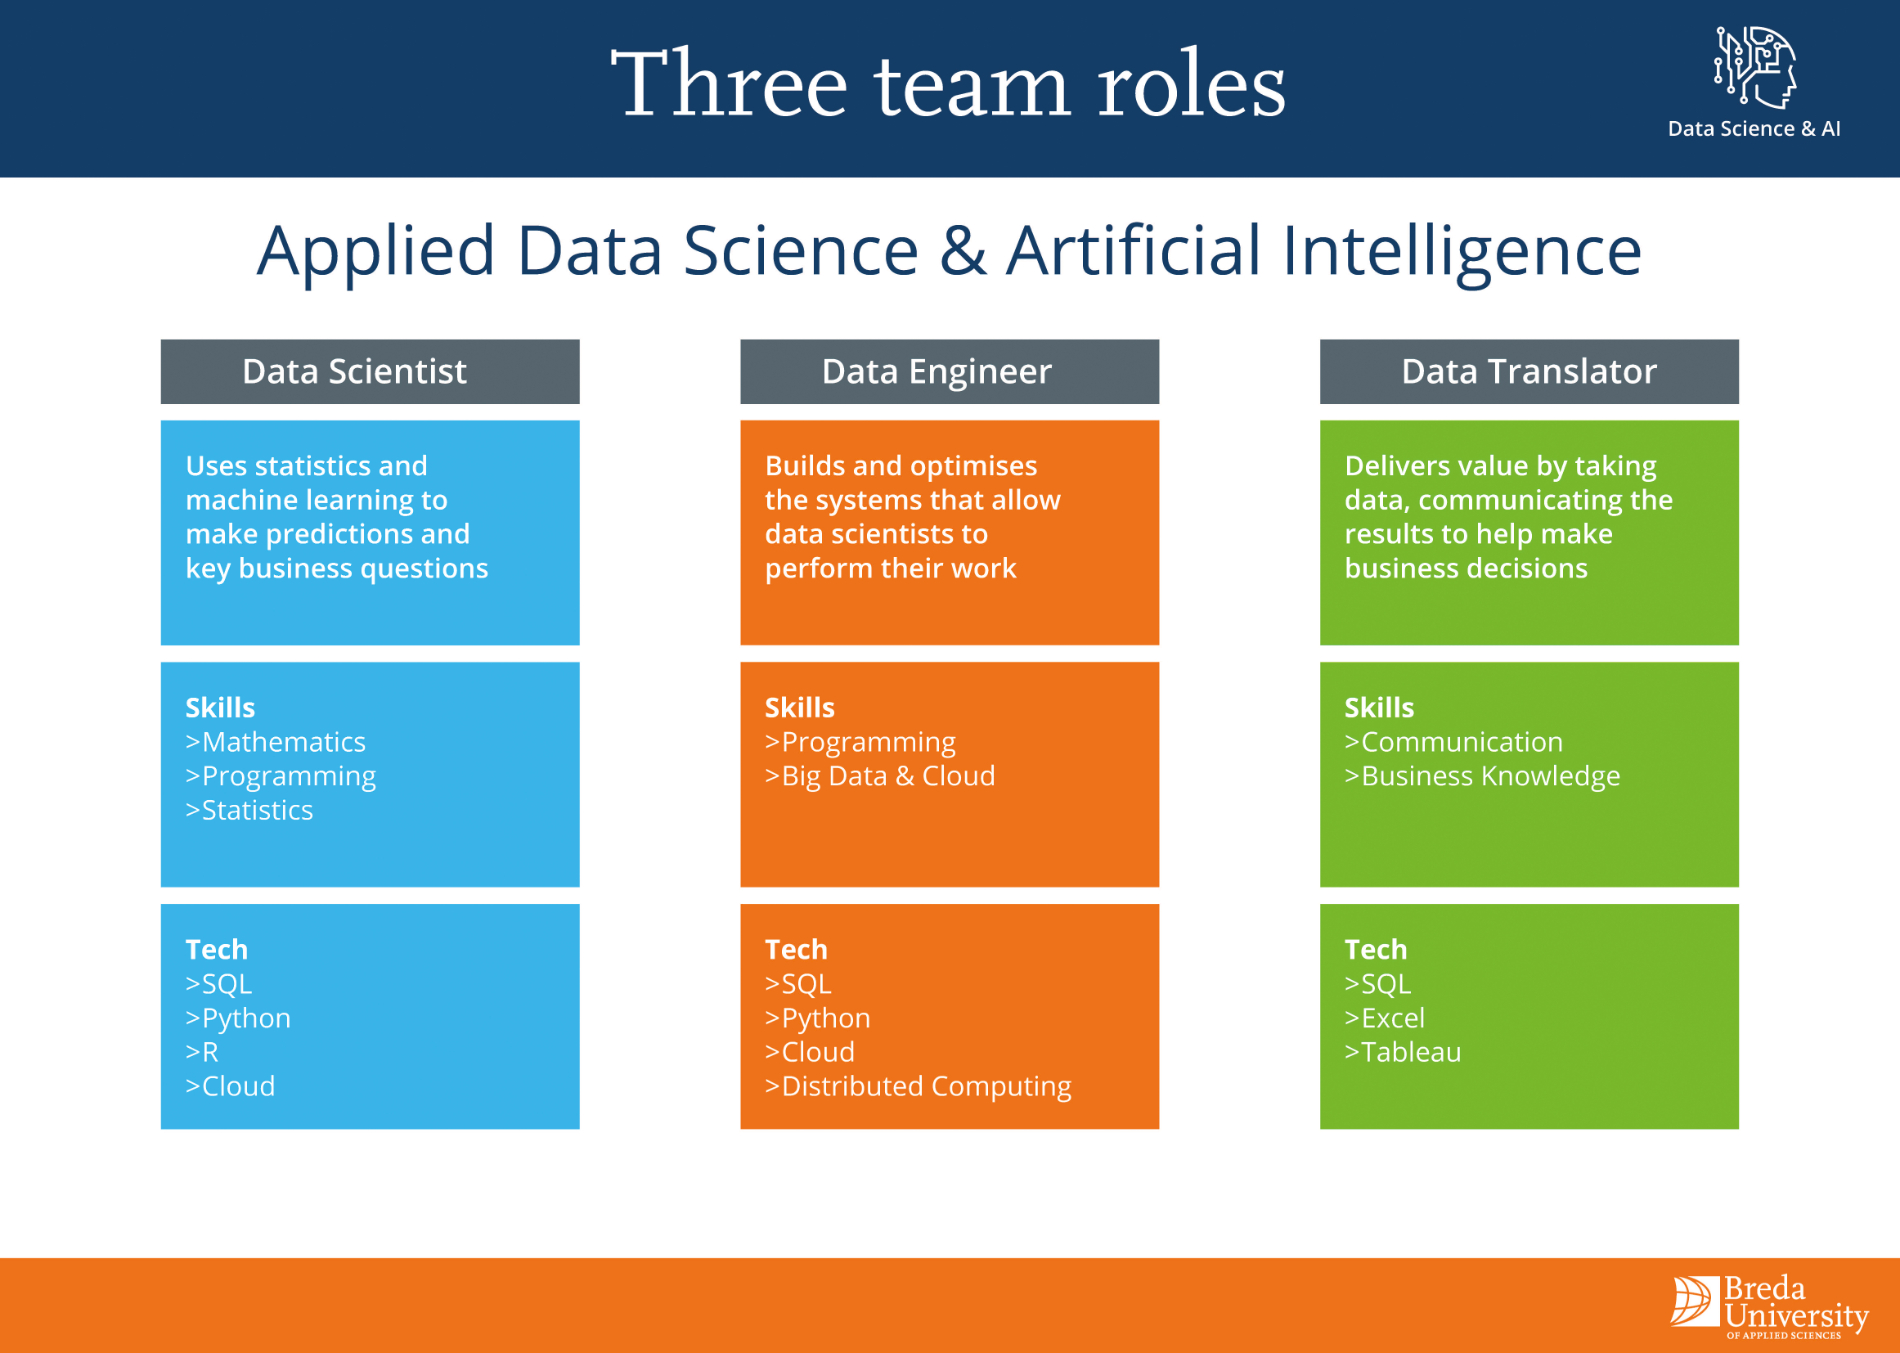 Applied Data Science & AI - Team roles